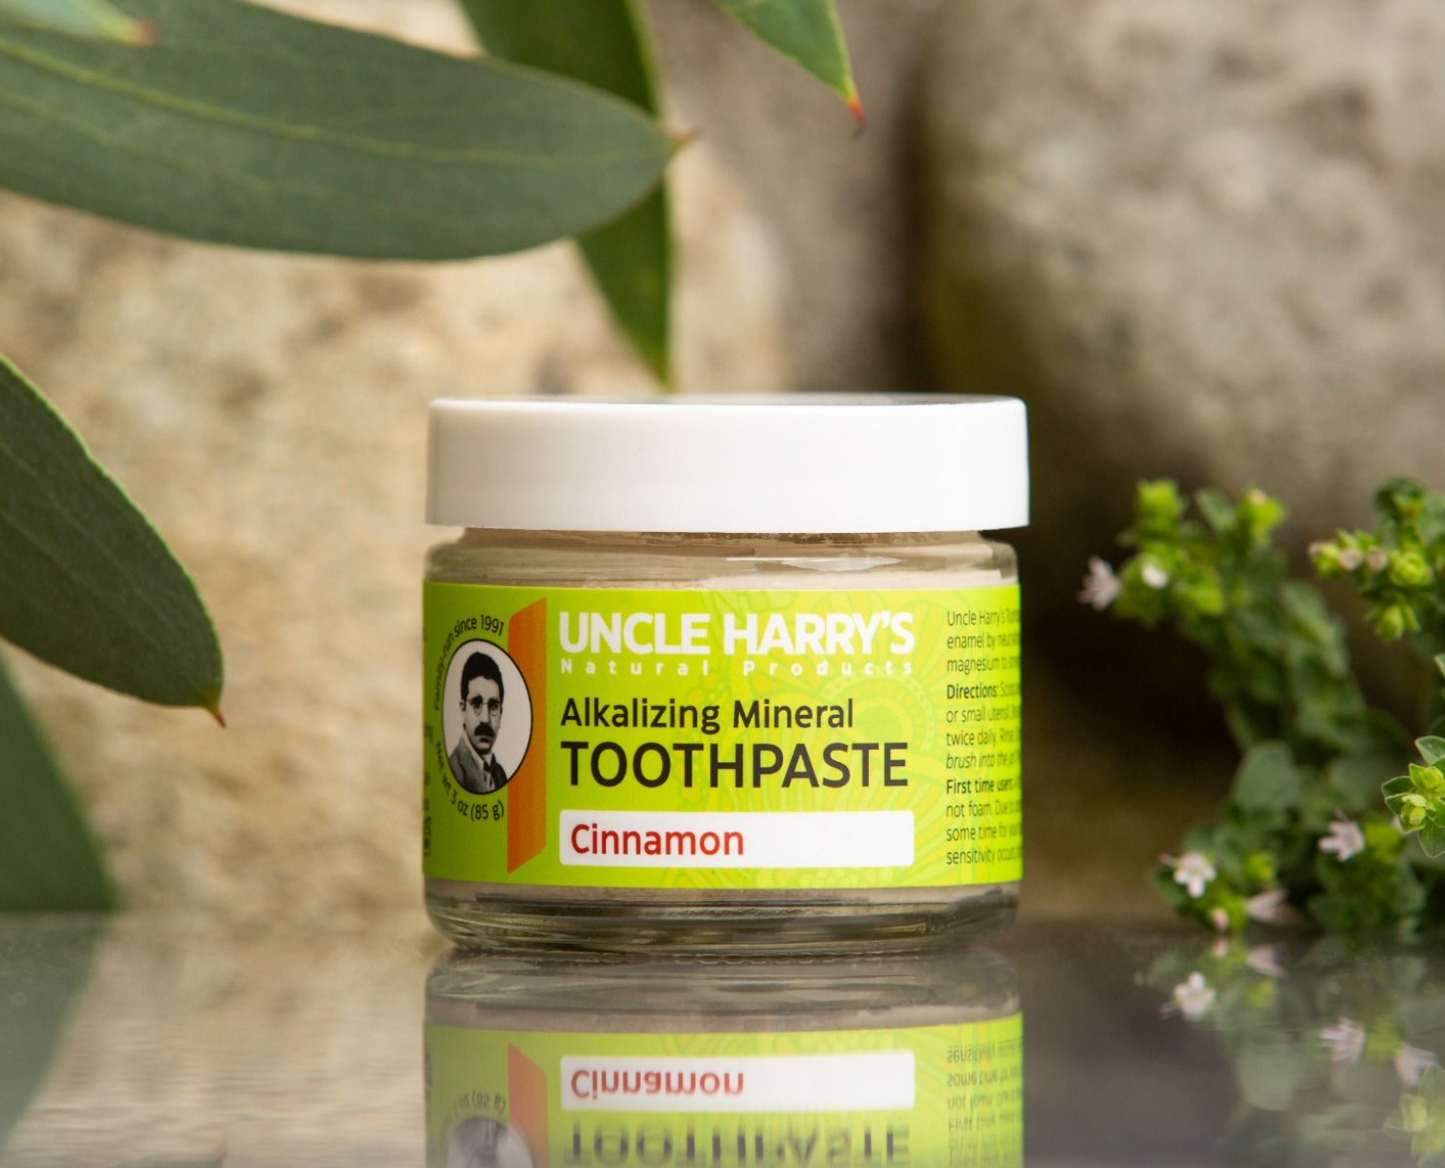 Alkalizing Mineral Toothpaste